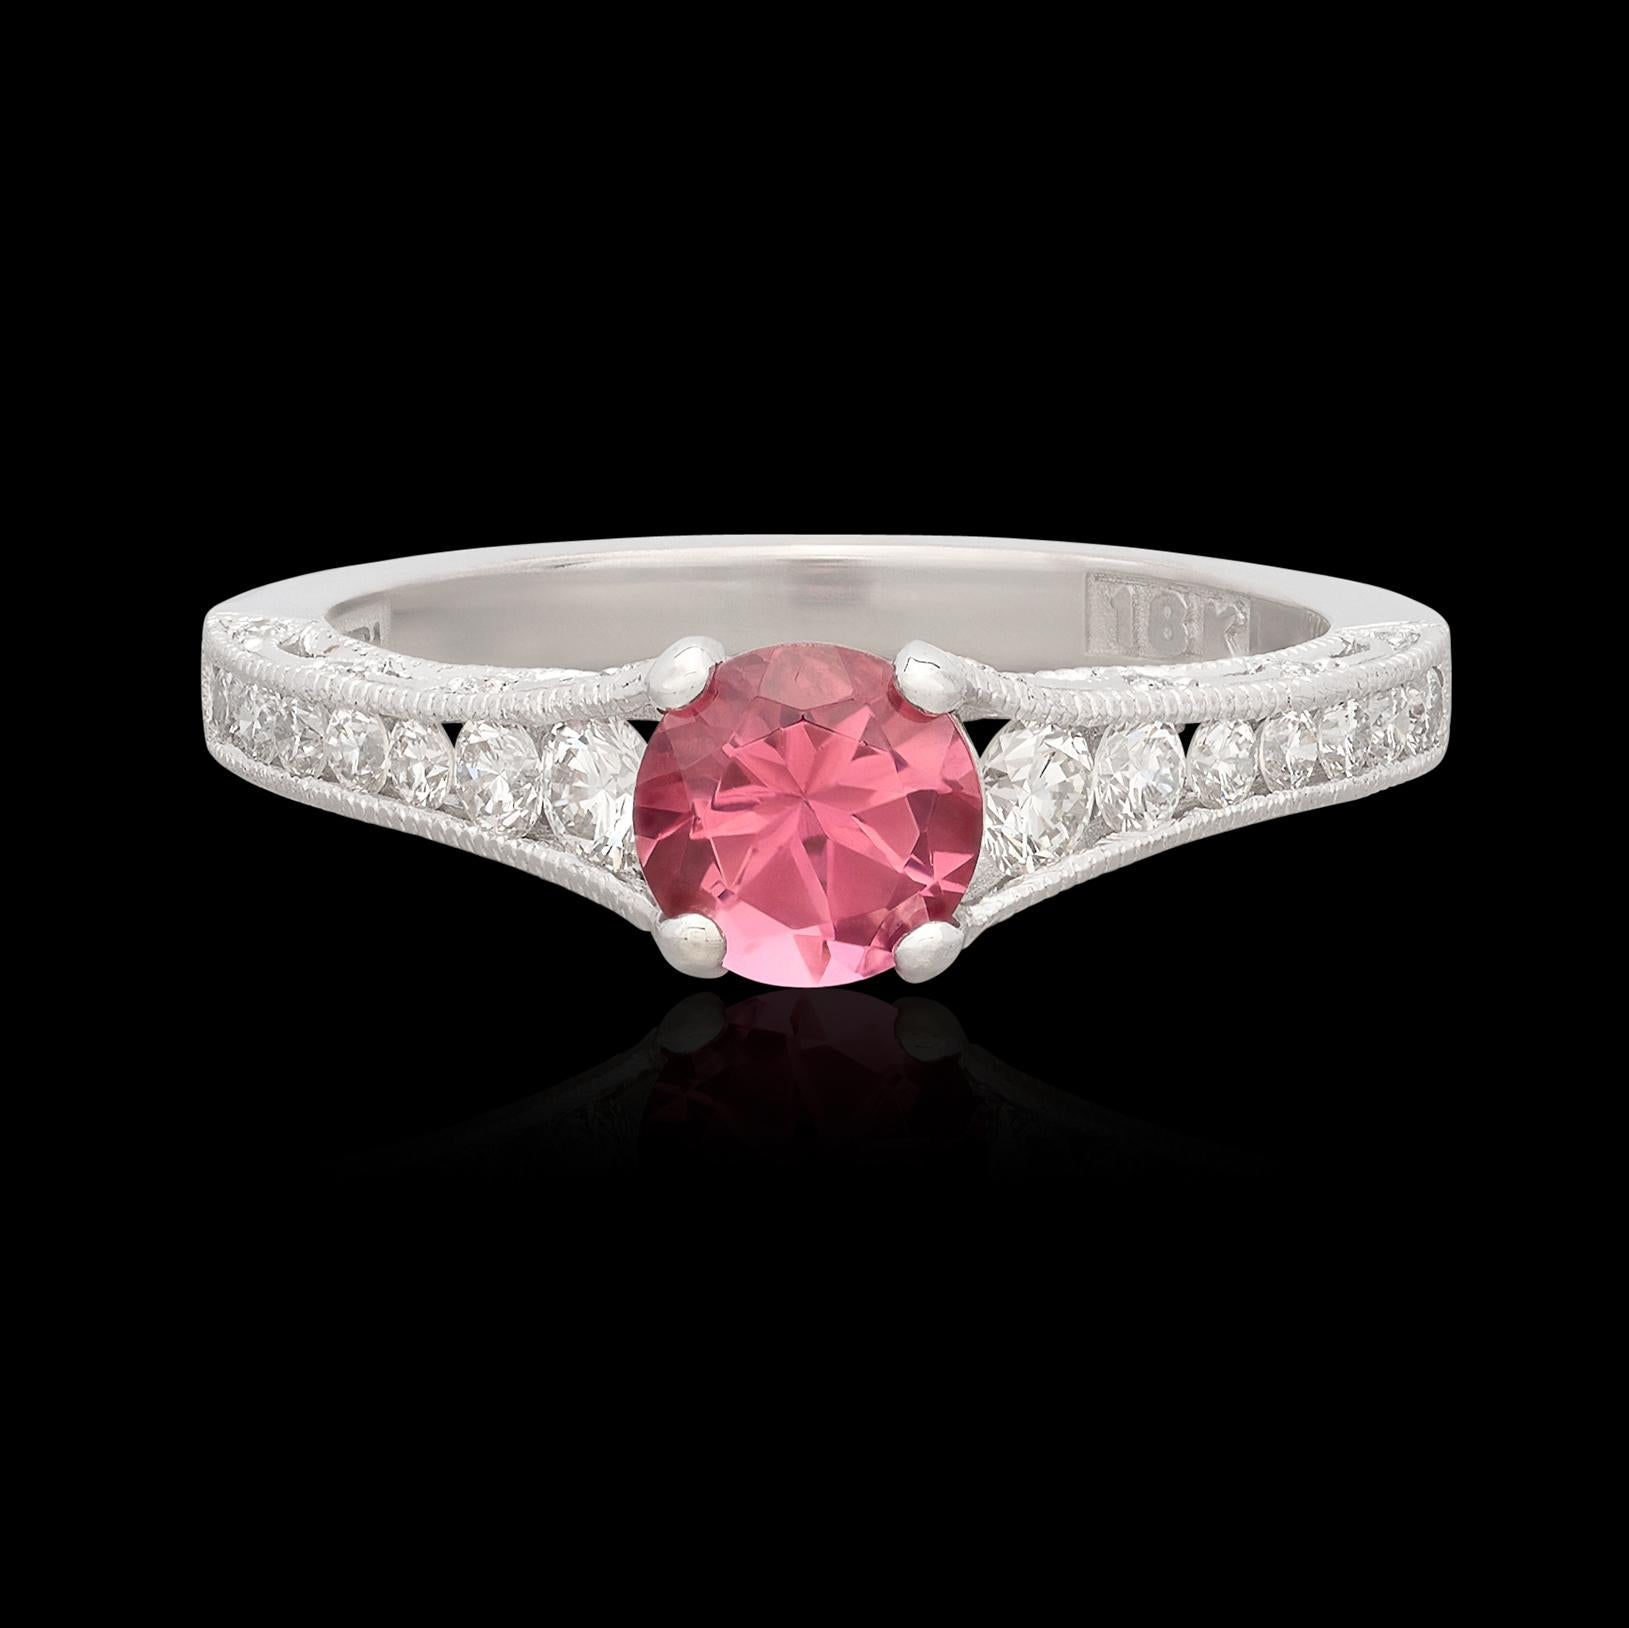 Perhaps the perfect pop of color! One exquisite purplish pink tourmaline weighing 0.83 carats is perfectly set with four prongs in a gorgeous 18 karat white gold ring by Tacori. Accenting the white gold ring are 32 perfectly matched diamonds for